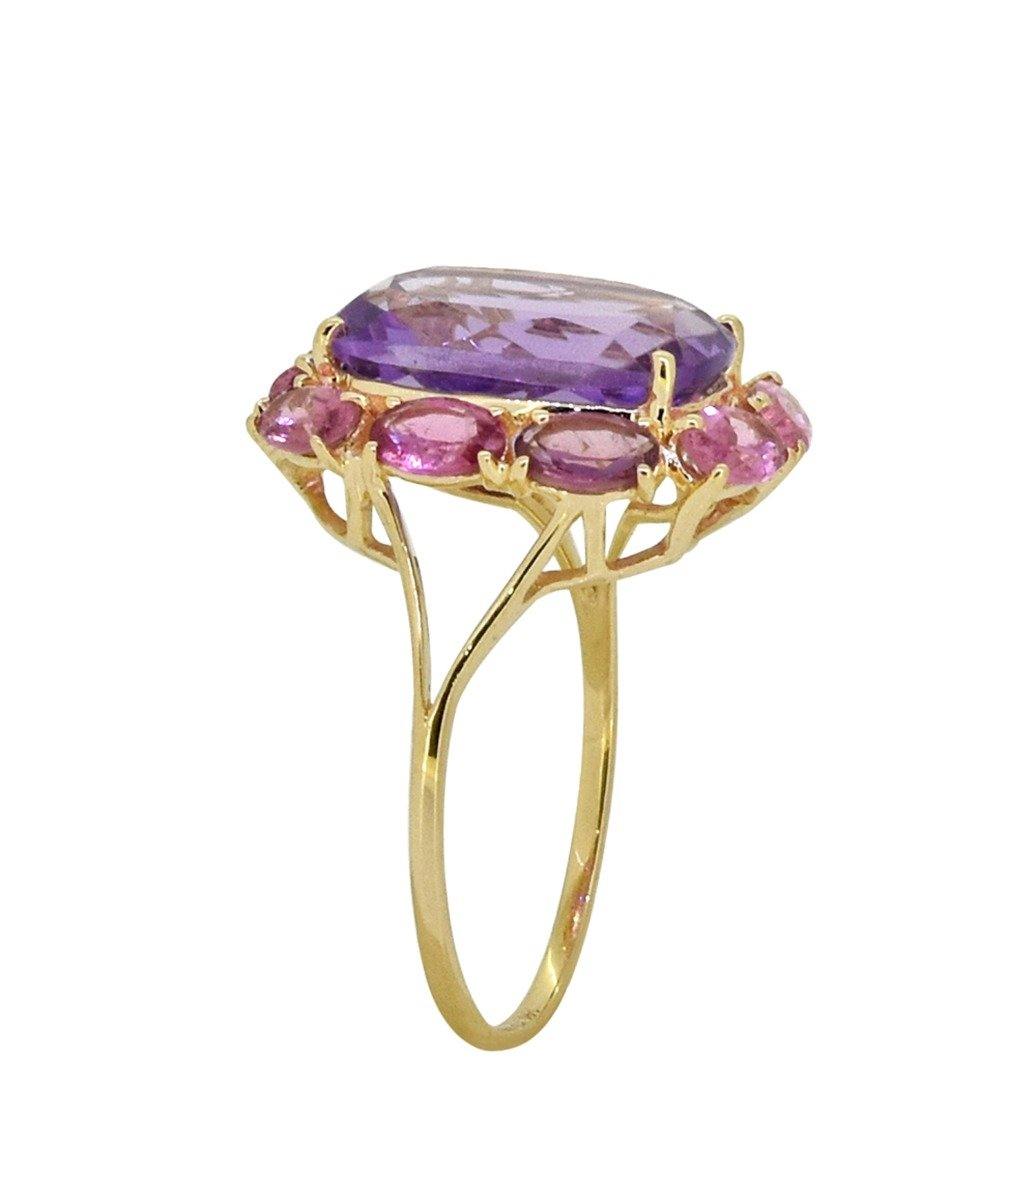 8.30 Ct Pink Amethyst Tourmaline Solid 14k Yellow Gold Cluster Ring Jewelry - YoTreasure